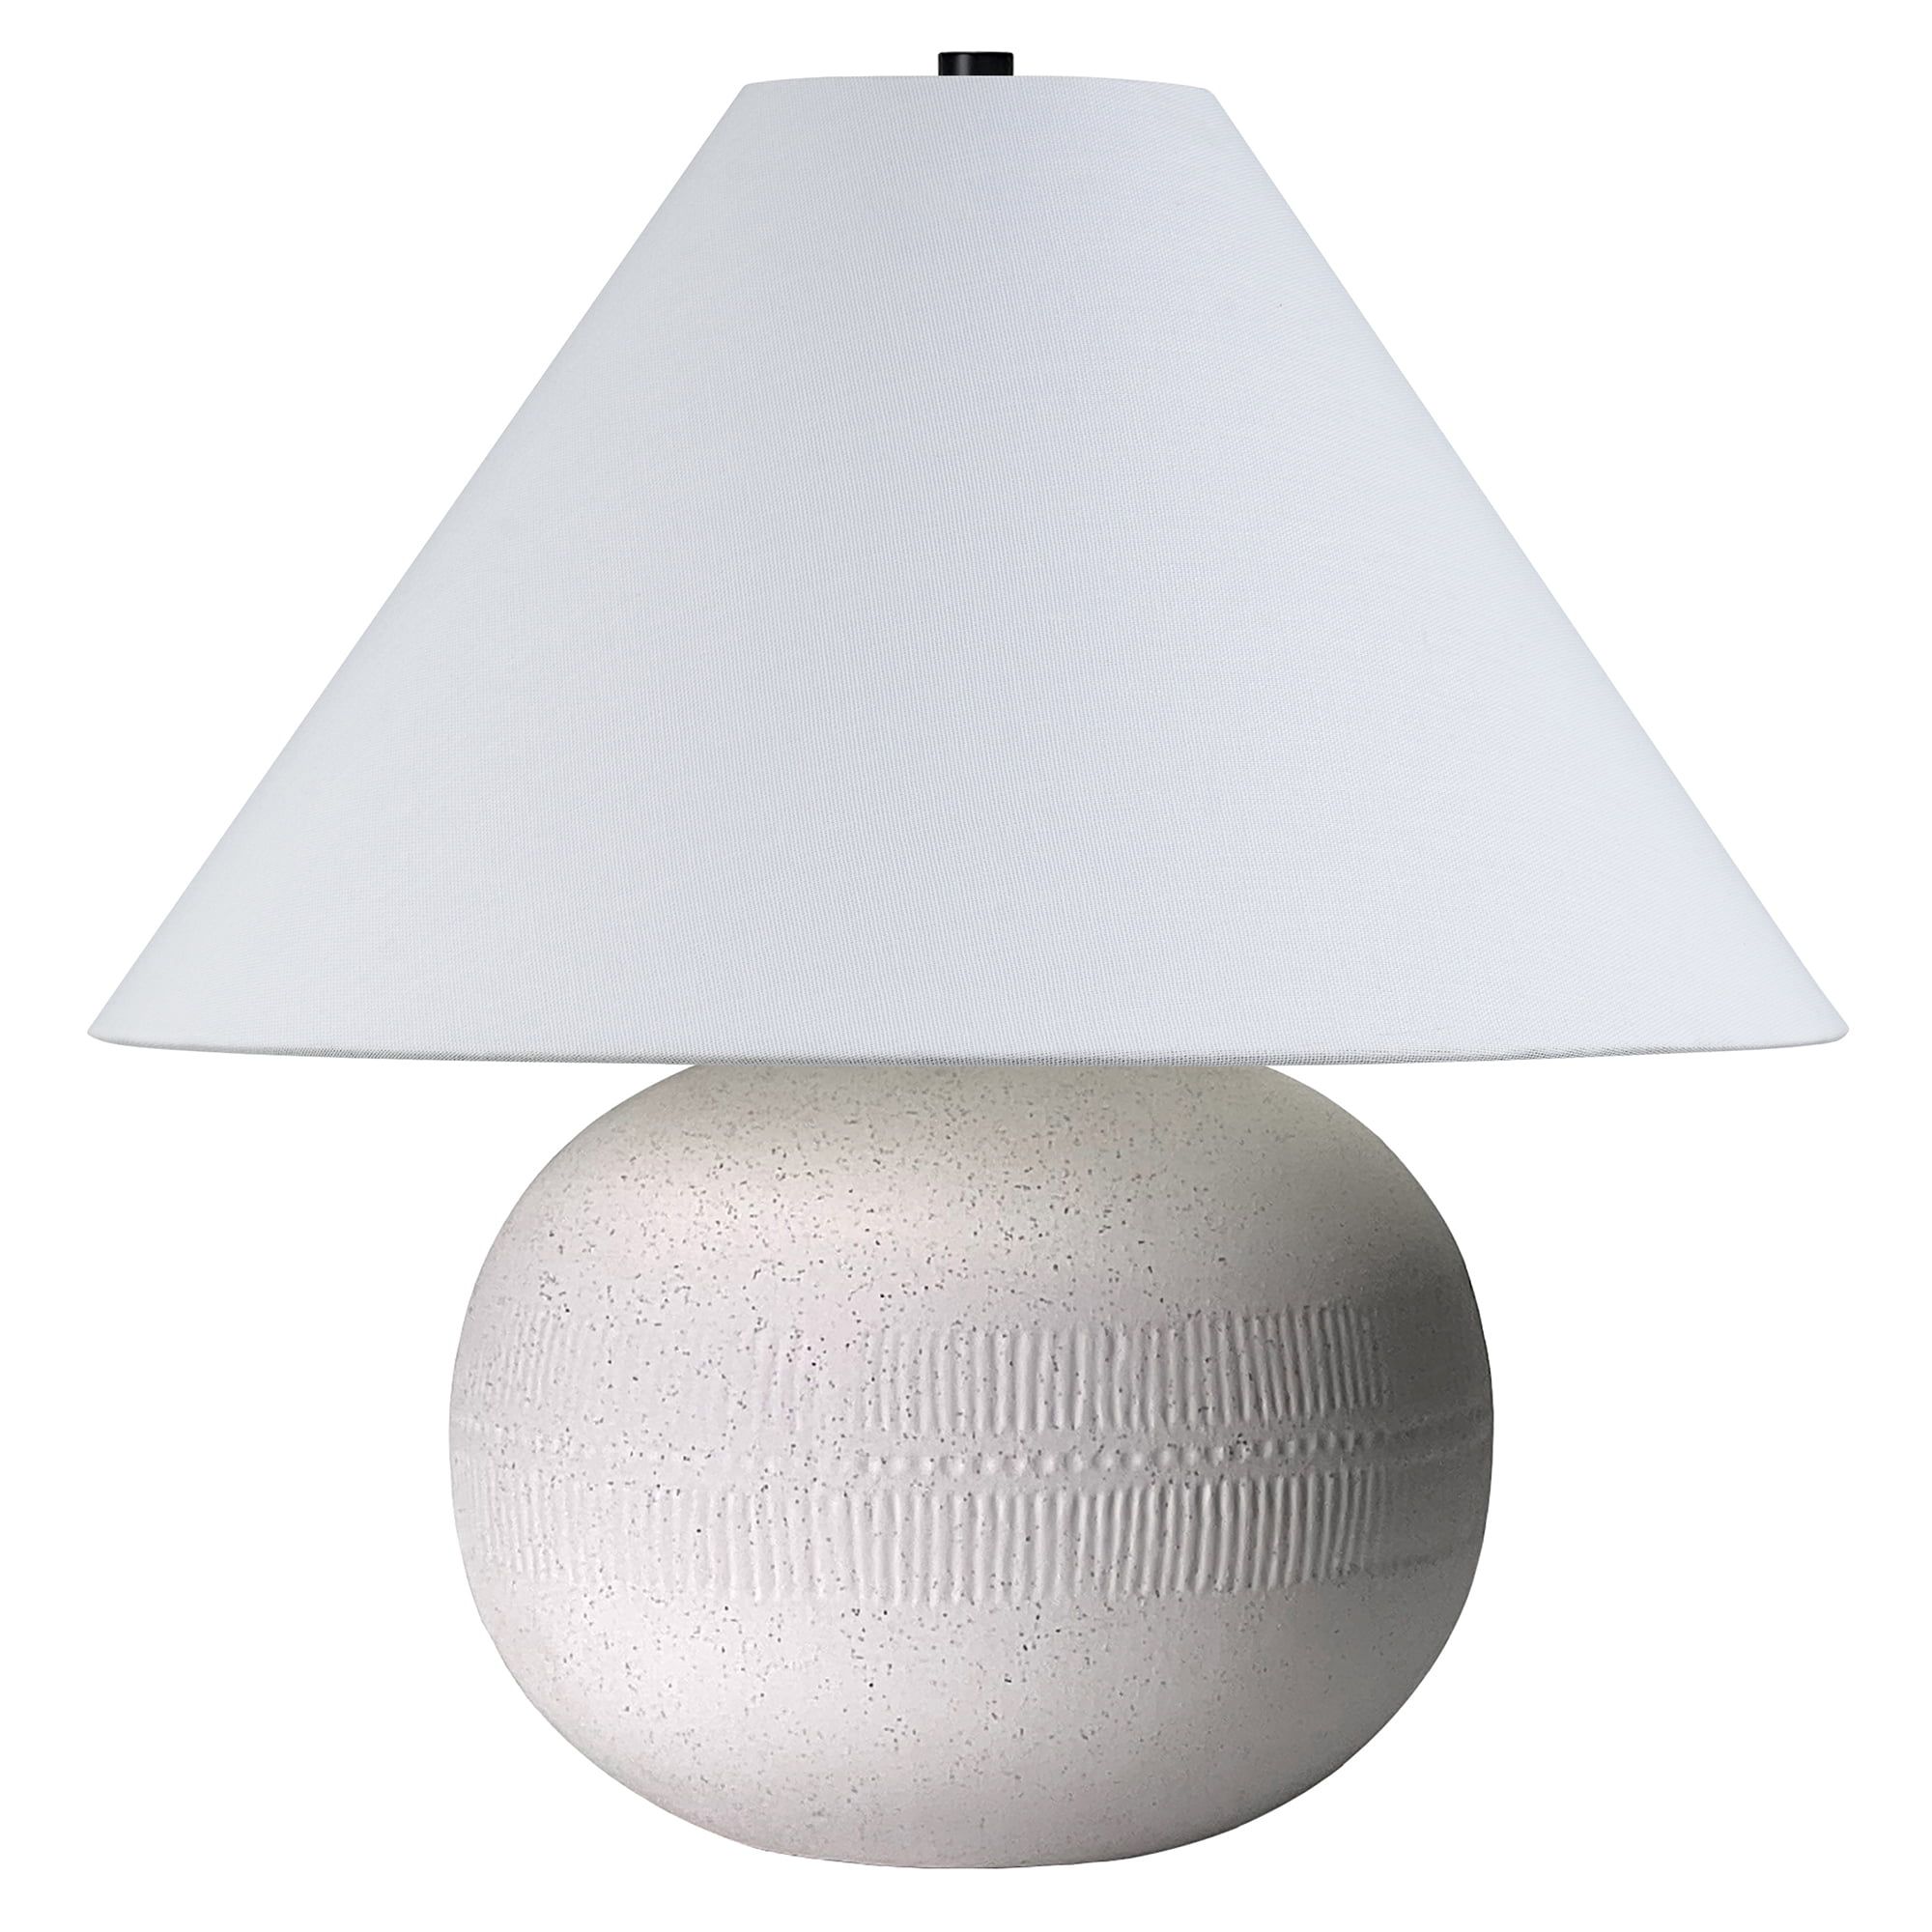 Evelyn&Zoe Willa 18.33" Modern Ceramic Table Lamp with White Cone Fabric Shade | Walmart (US)